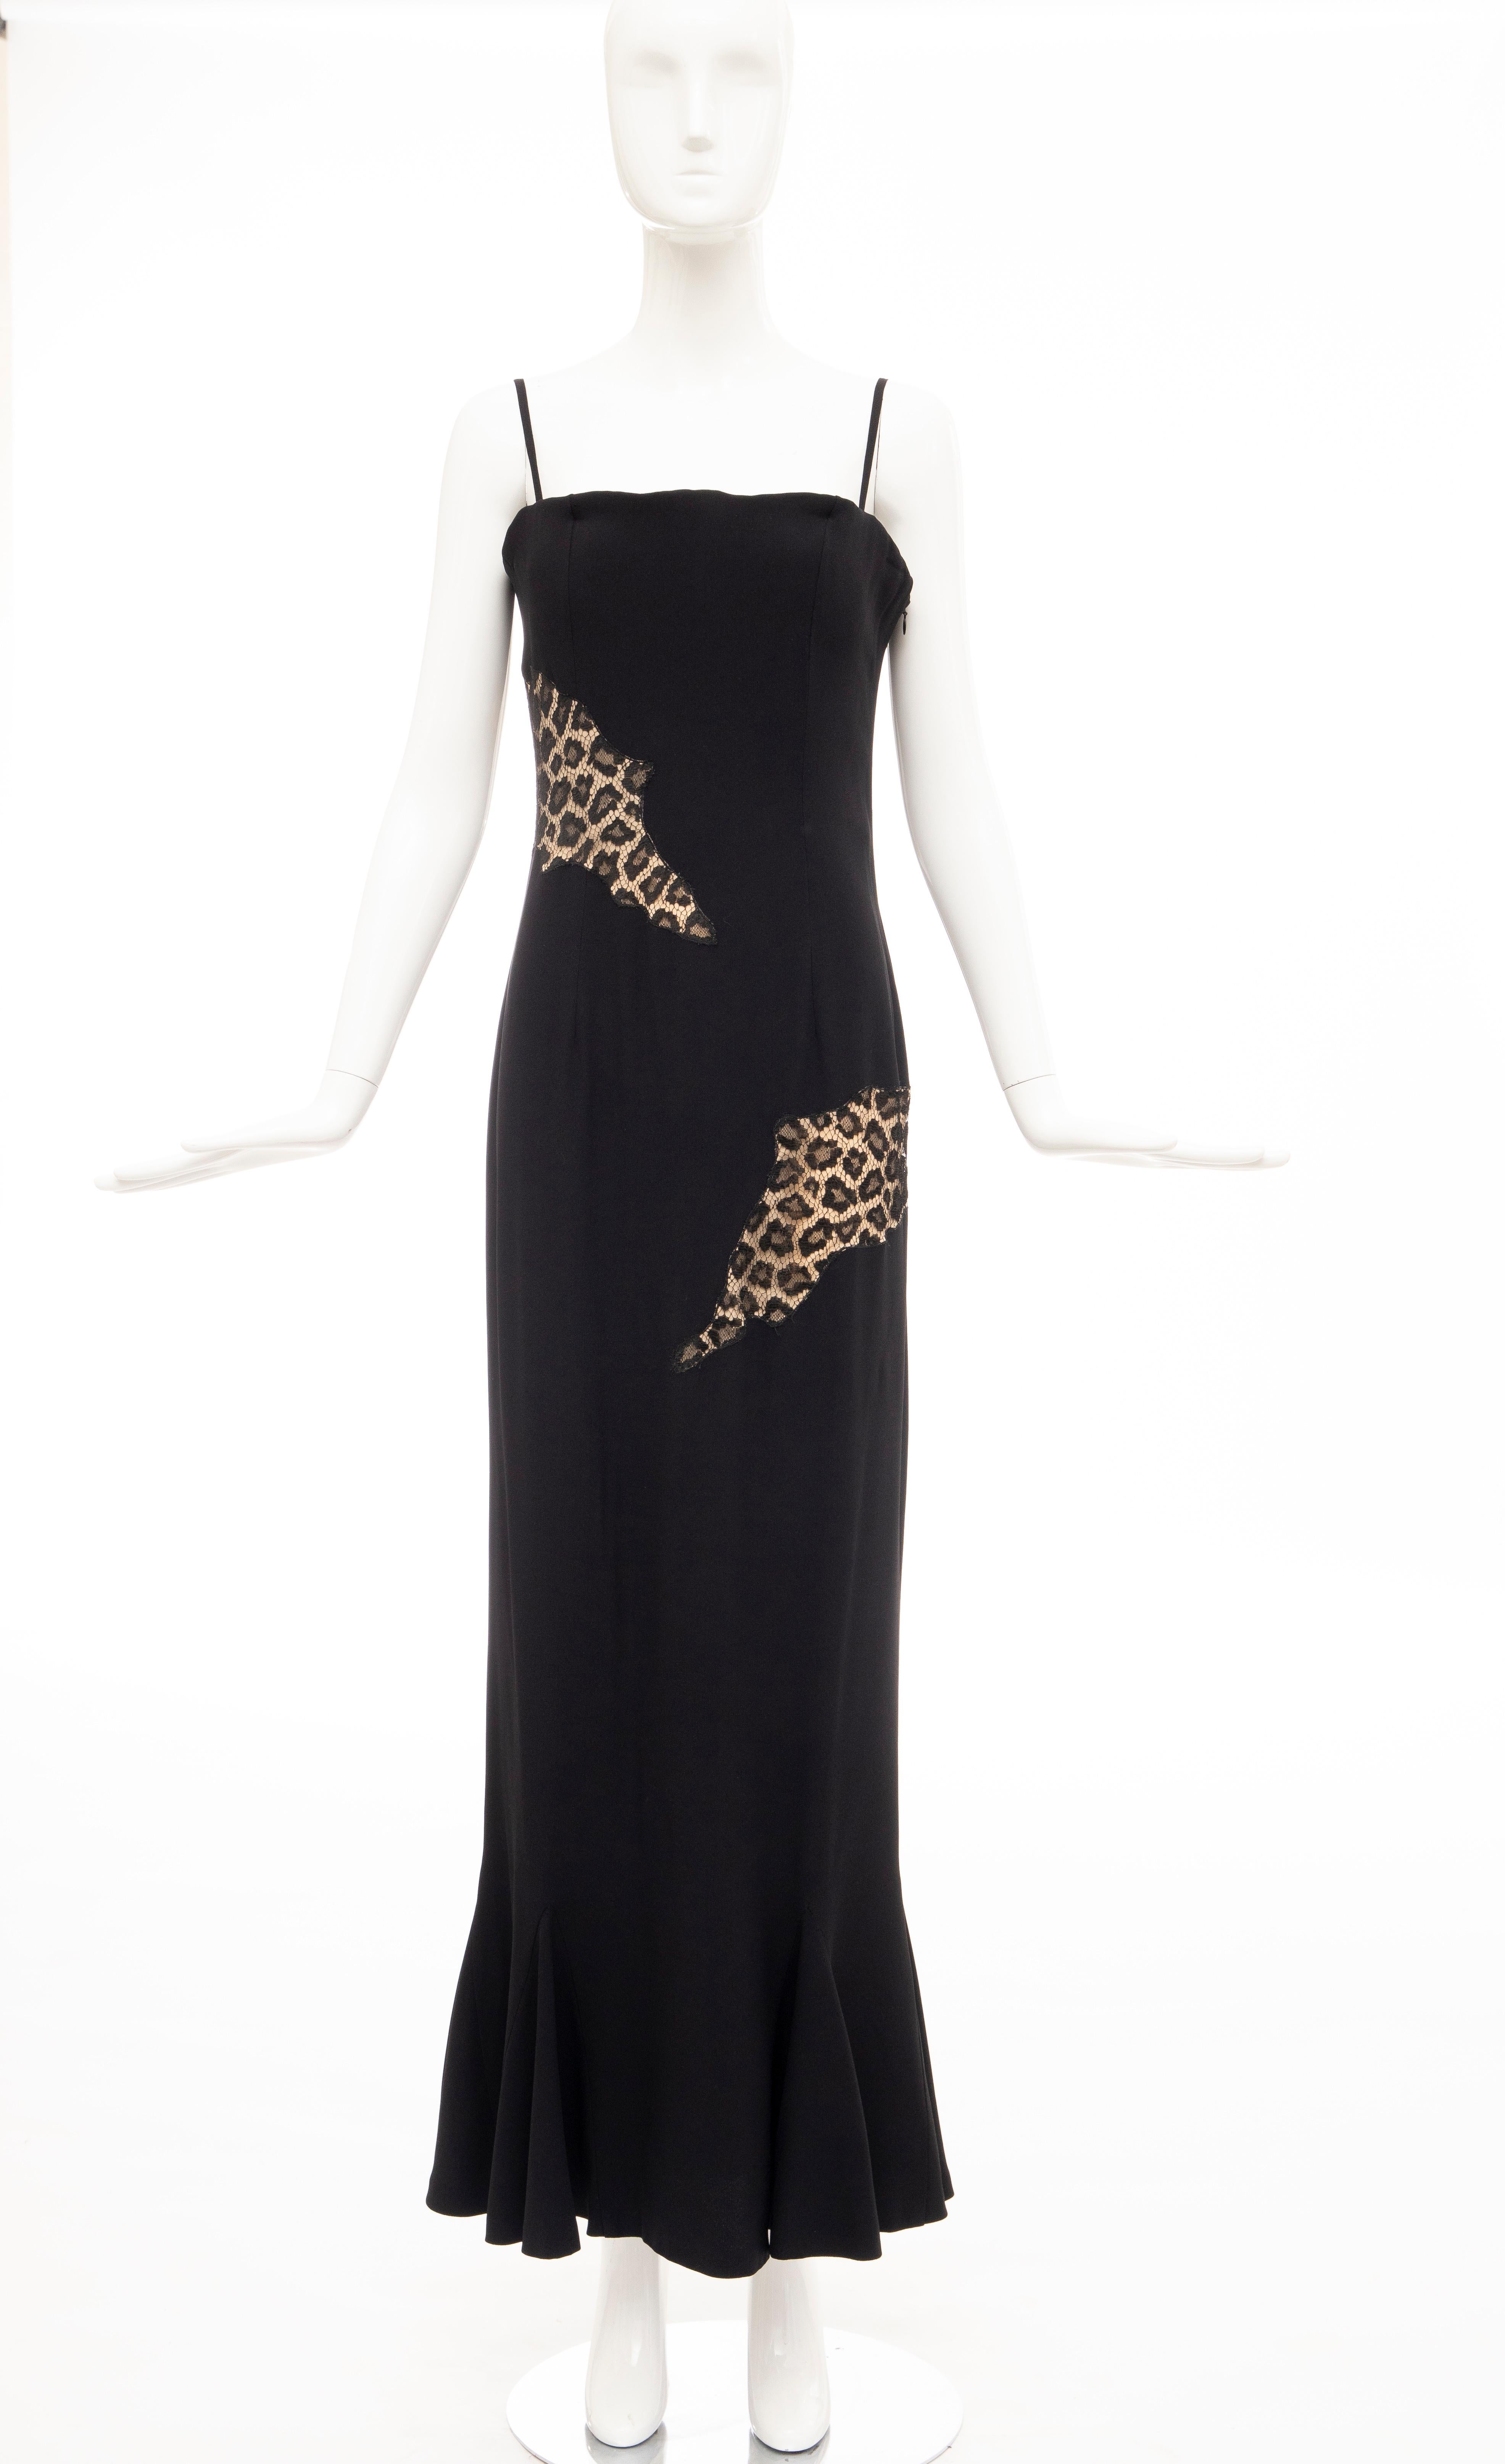 Alexander McQueen for Givenchy Couture, Fall 1997, black spaghetti strap evening dress, boning at bust, leopard lace panels, fluted hem and concealed zip closure at side. 

FR. 42, US. 10

Bust: 33